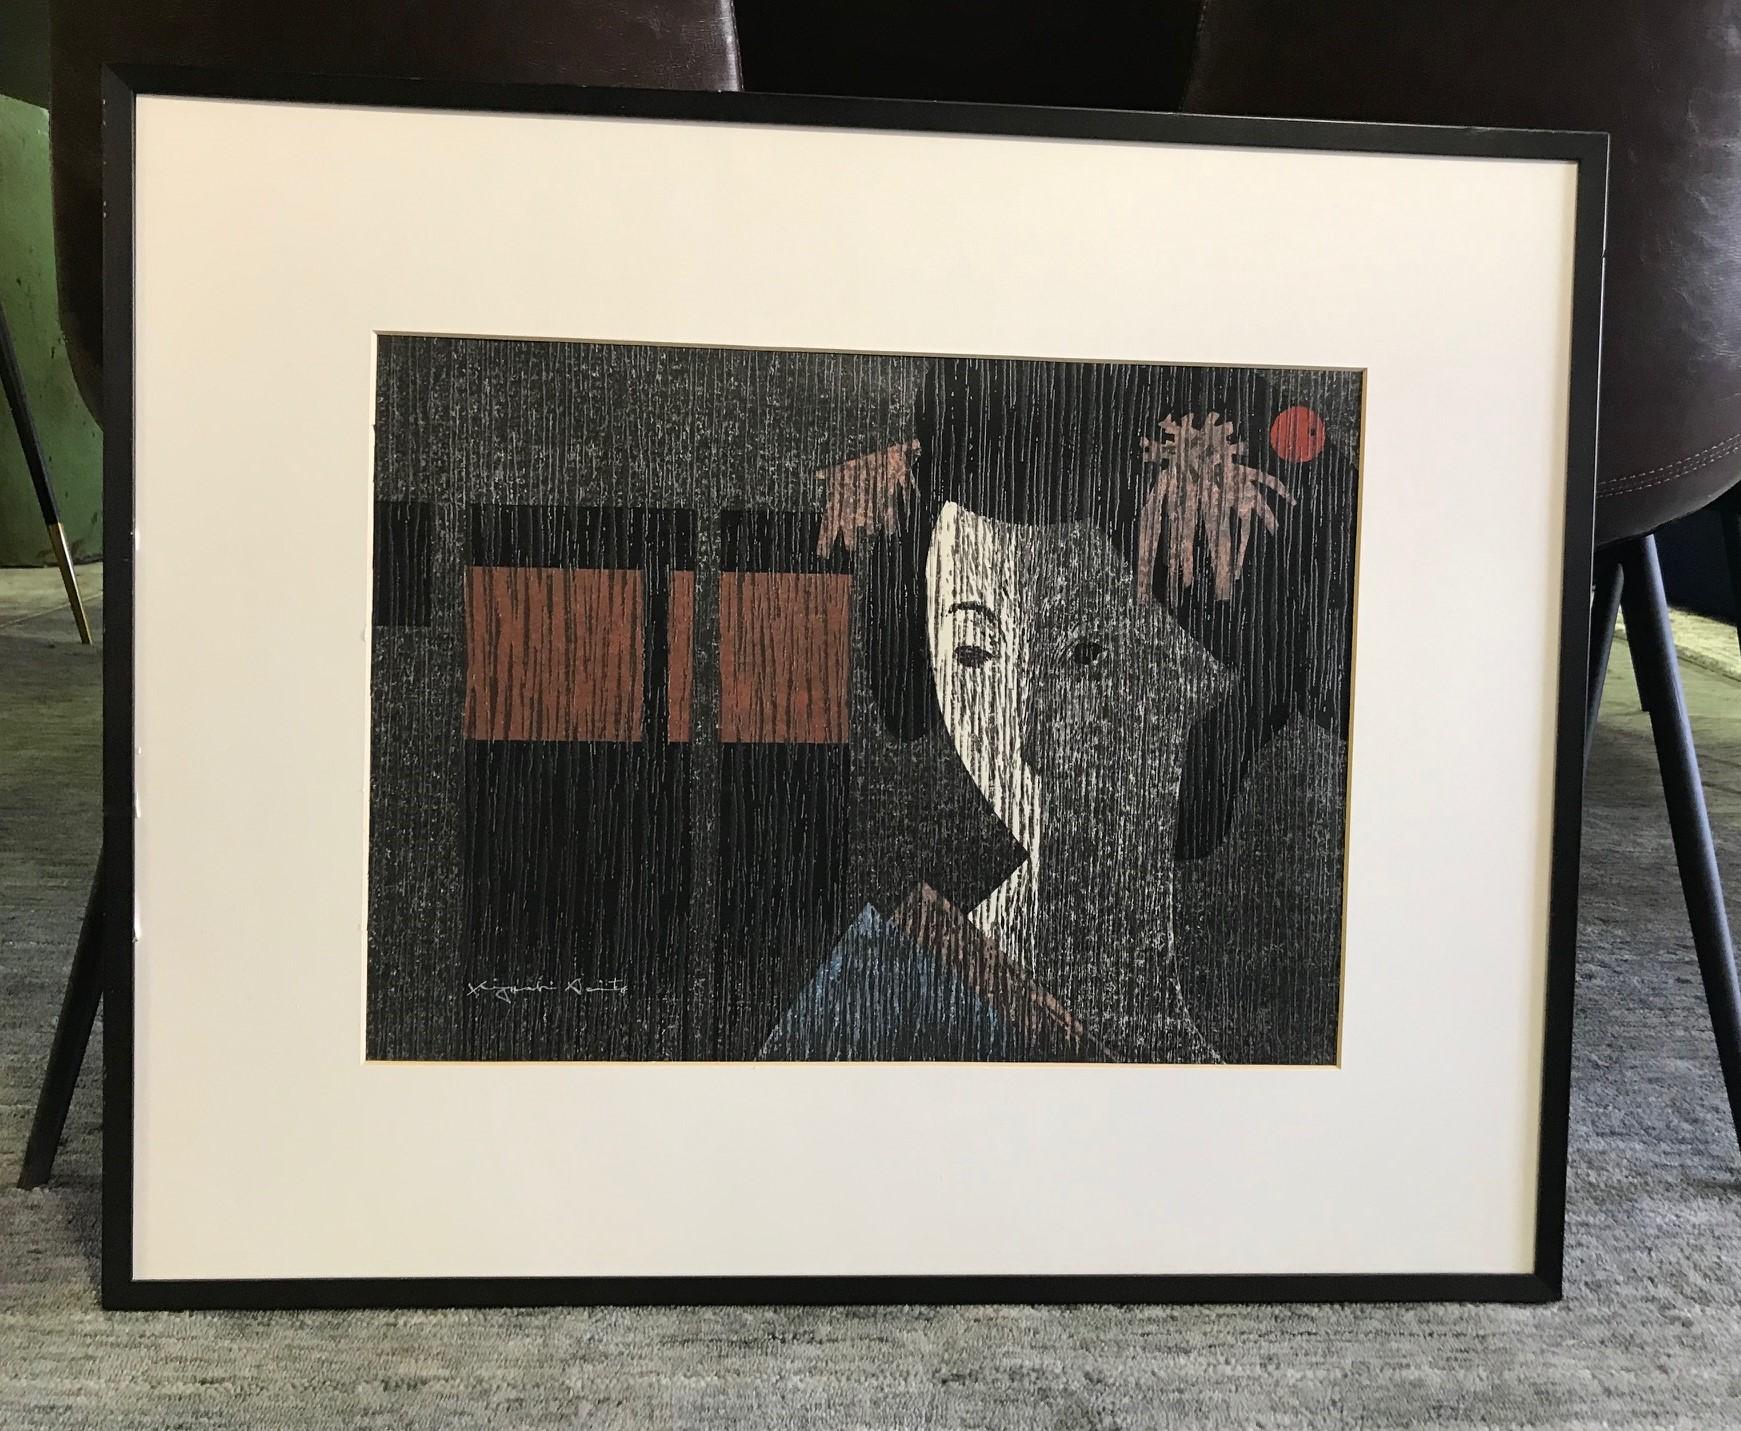 A beautifully composed, rare woodblock print by famed Japanese print maker Kiyoshi Saito. Many consider Saito to be one of the most important, if not the most important, contemporary Japanese print makers of the 20th century. This print of a geisha